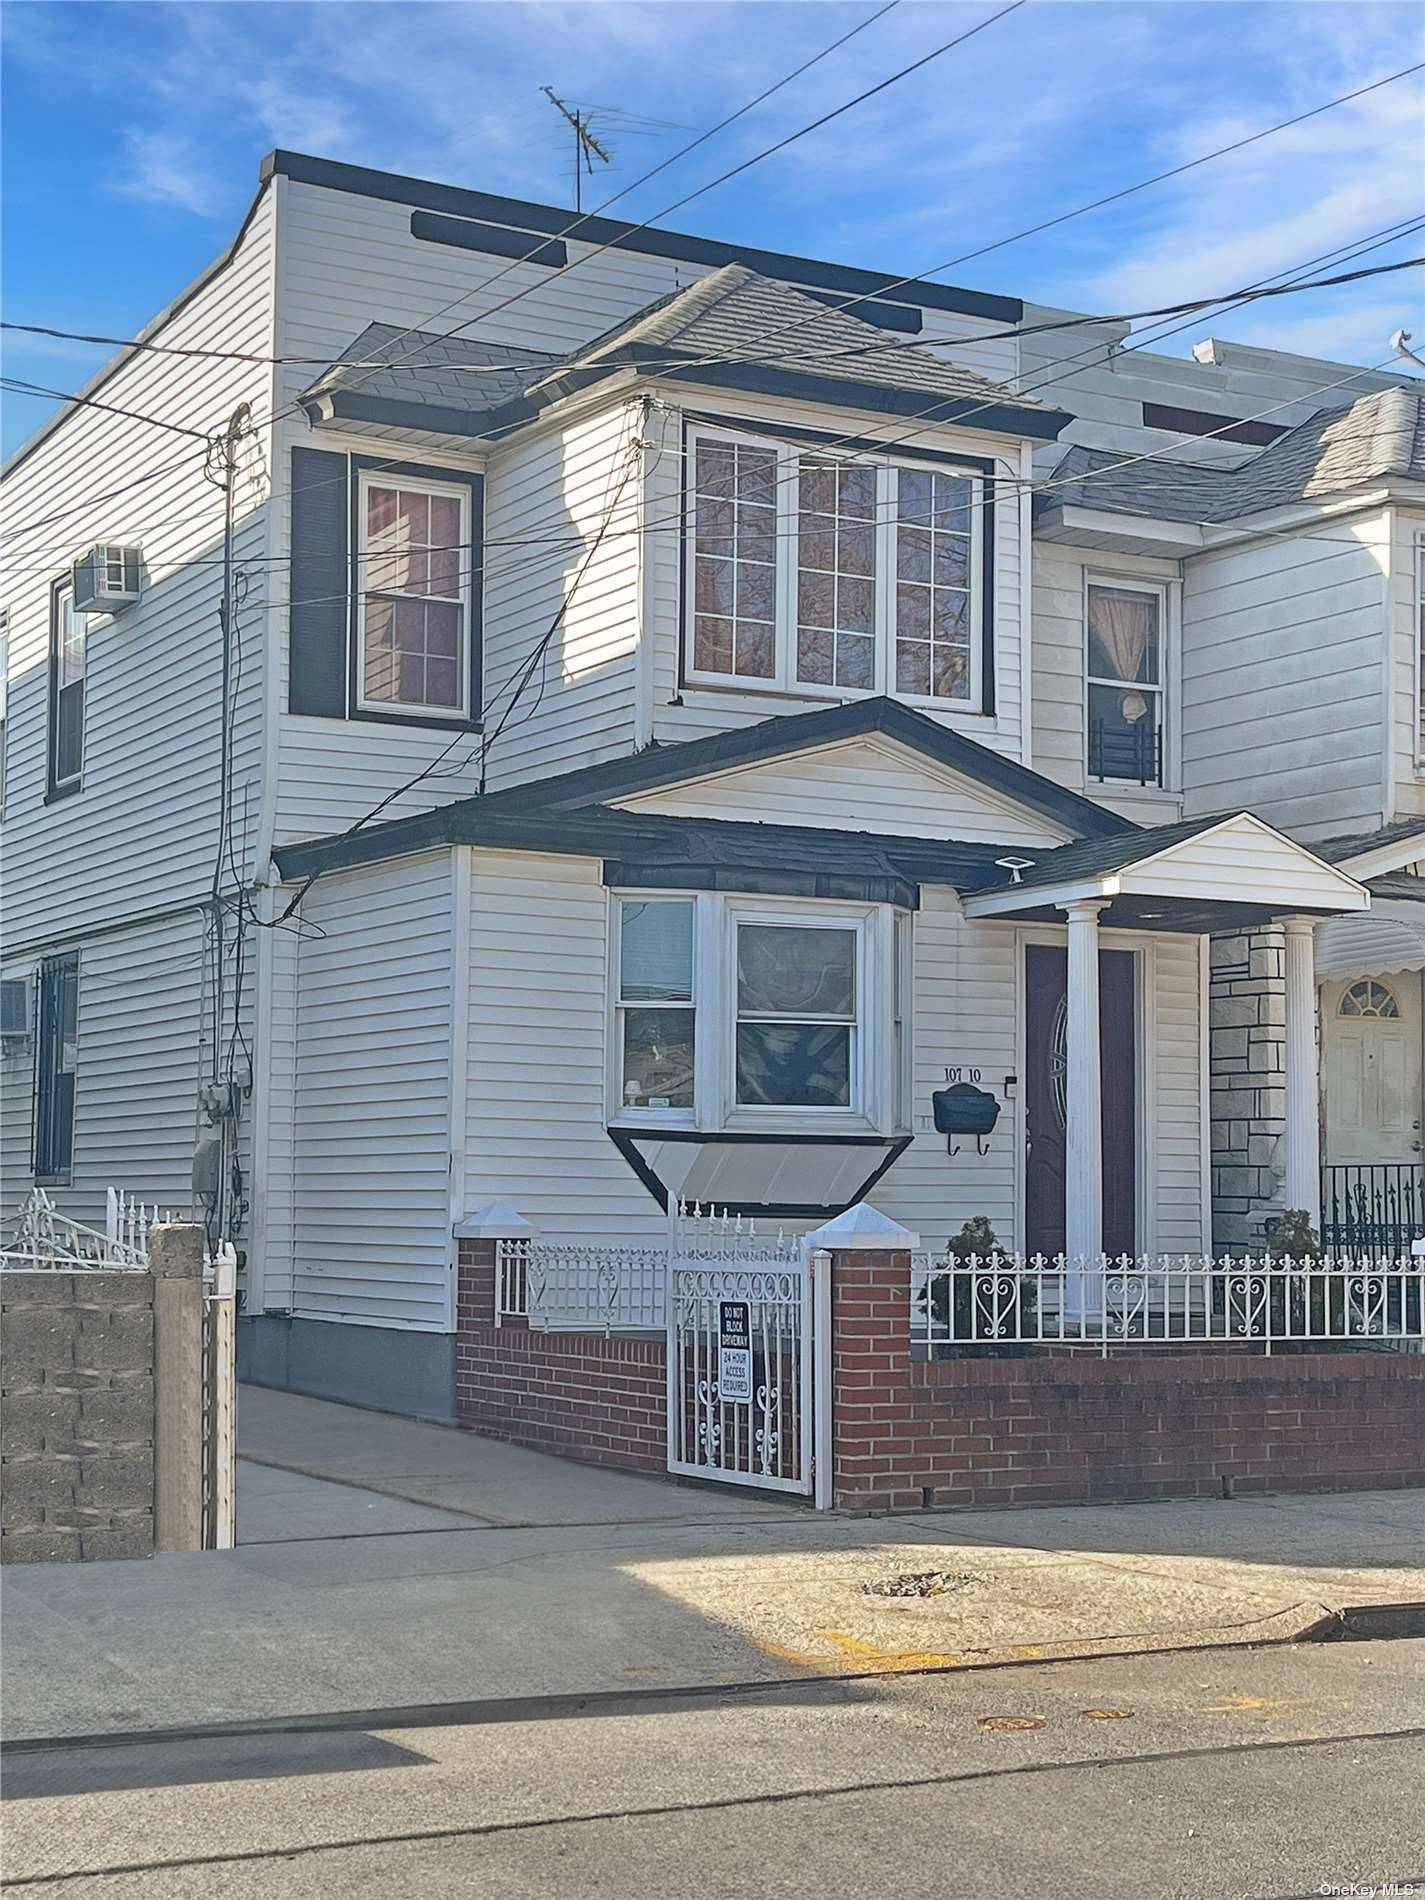 Newly Listed Two Family in Ozone Park Queens.